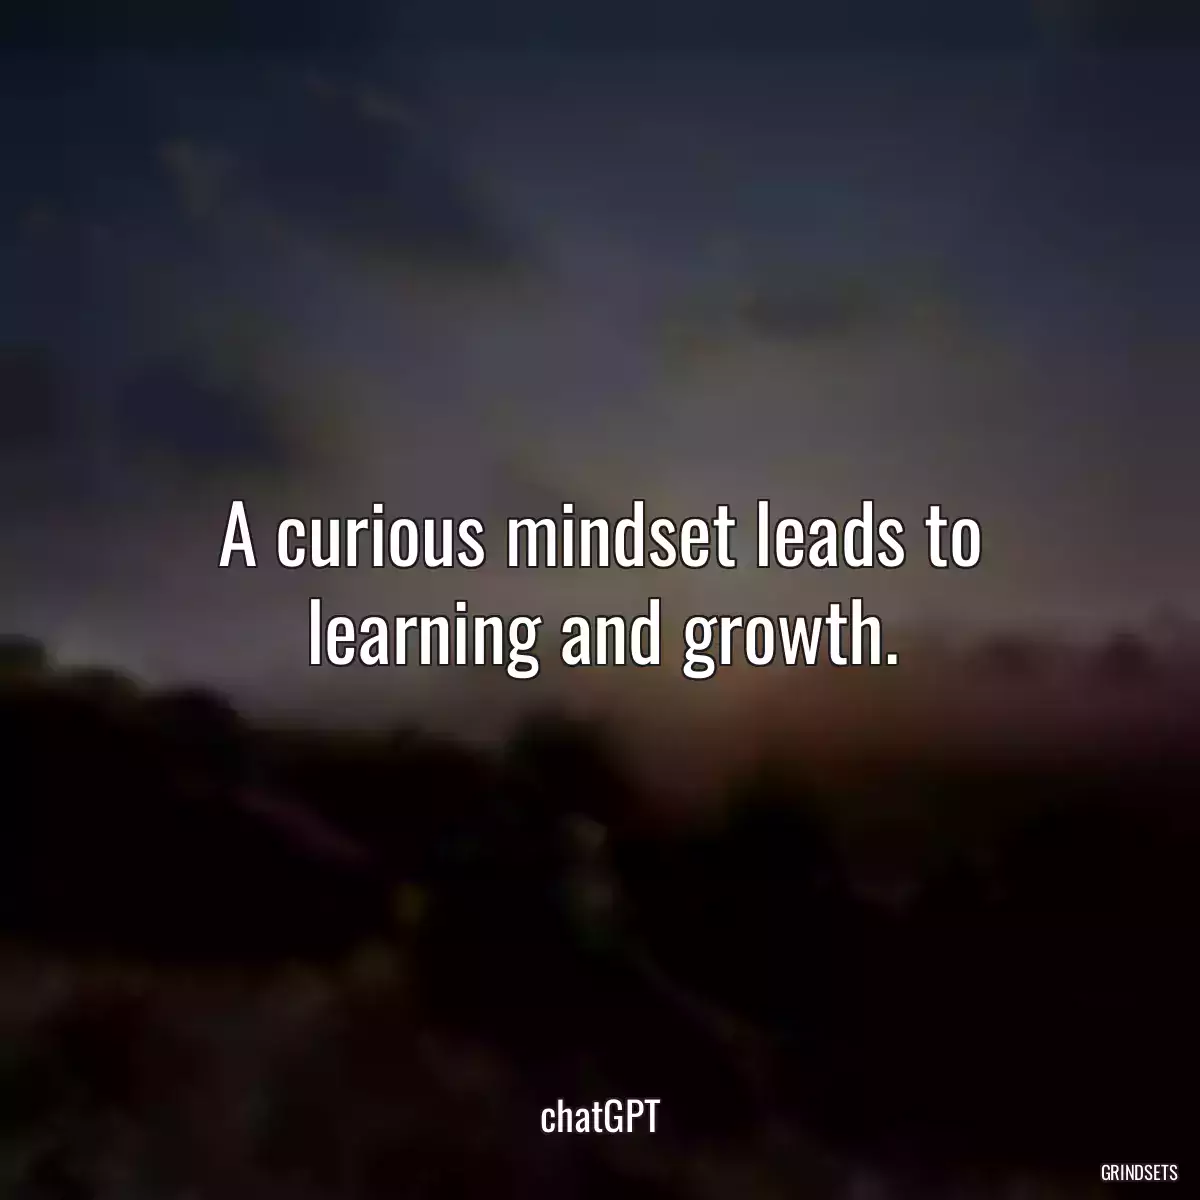 A curious mindset leads to learning and growth.